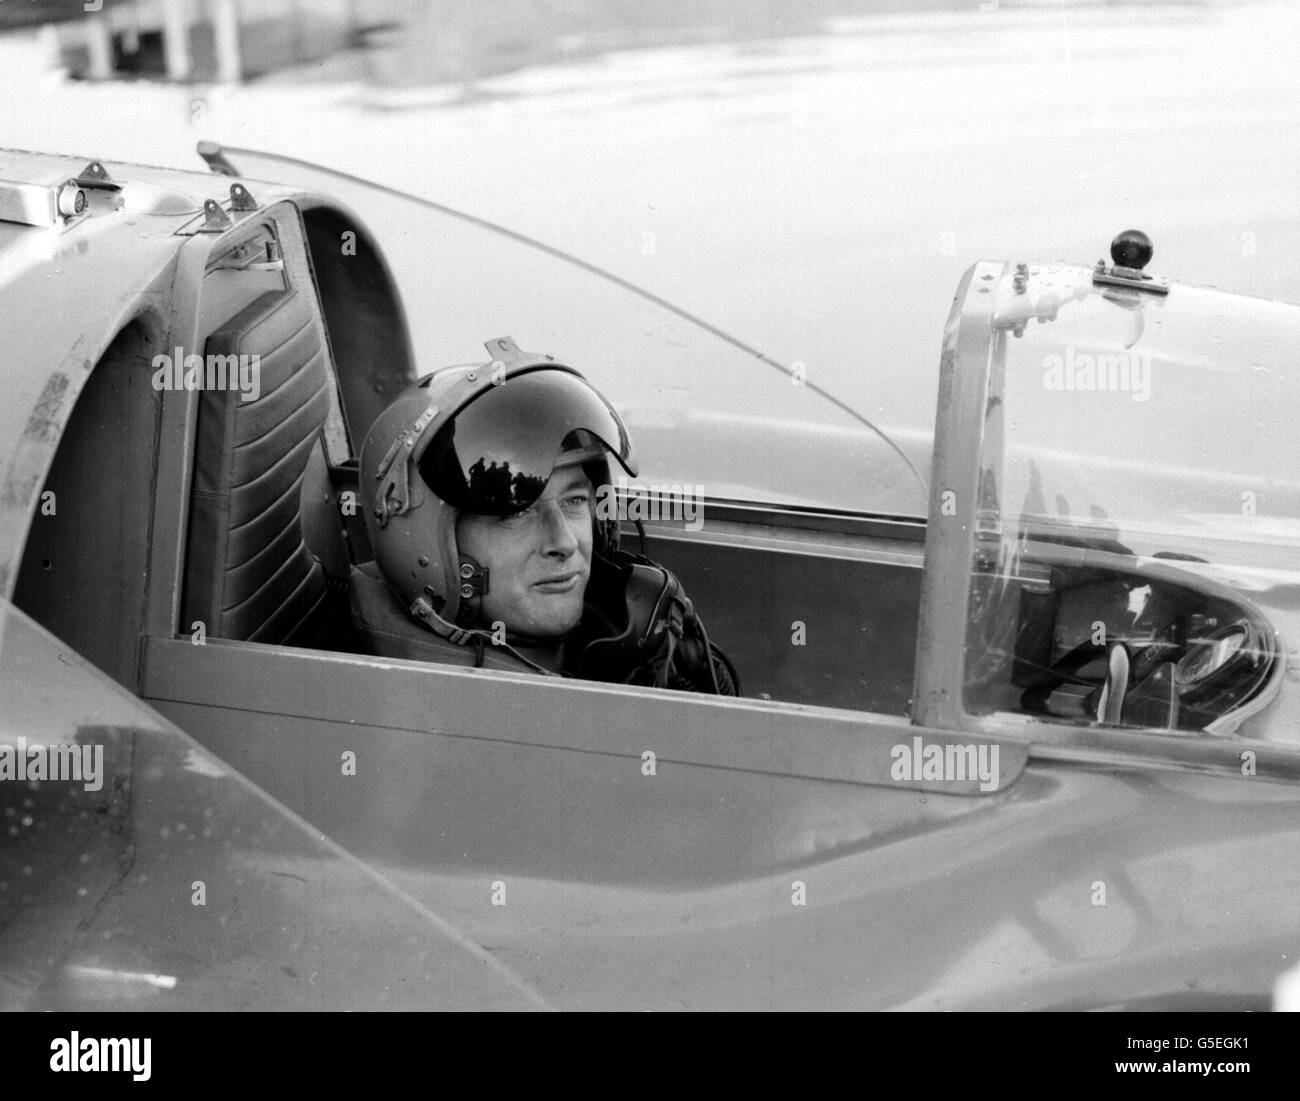 DECEMBER 31st: DONALD CAMPBELL 31/12/1964: Campbell breaks his own Water Speed record, by achieving 276.33 mph on Coniston Water. DONALD CAMPBELL 1957: Mr Donald Campbell sitting in the cockpit of his hydroplane Bluebird at Coniston Water in the Lake District. Mr Campbell is preparing to attack his own world water speed record of 225.63mph. 25/10/02 : Mr Donald Campbell sitting in the cockpit of his hydroplane Bluebird at Coniston Water in the Lake District. Donald Campbell was destined to break speed records on water and land. Son of Sir Malcolm Campbell, who set the land speed record in Stock Photo